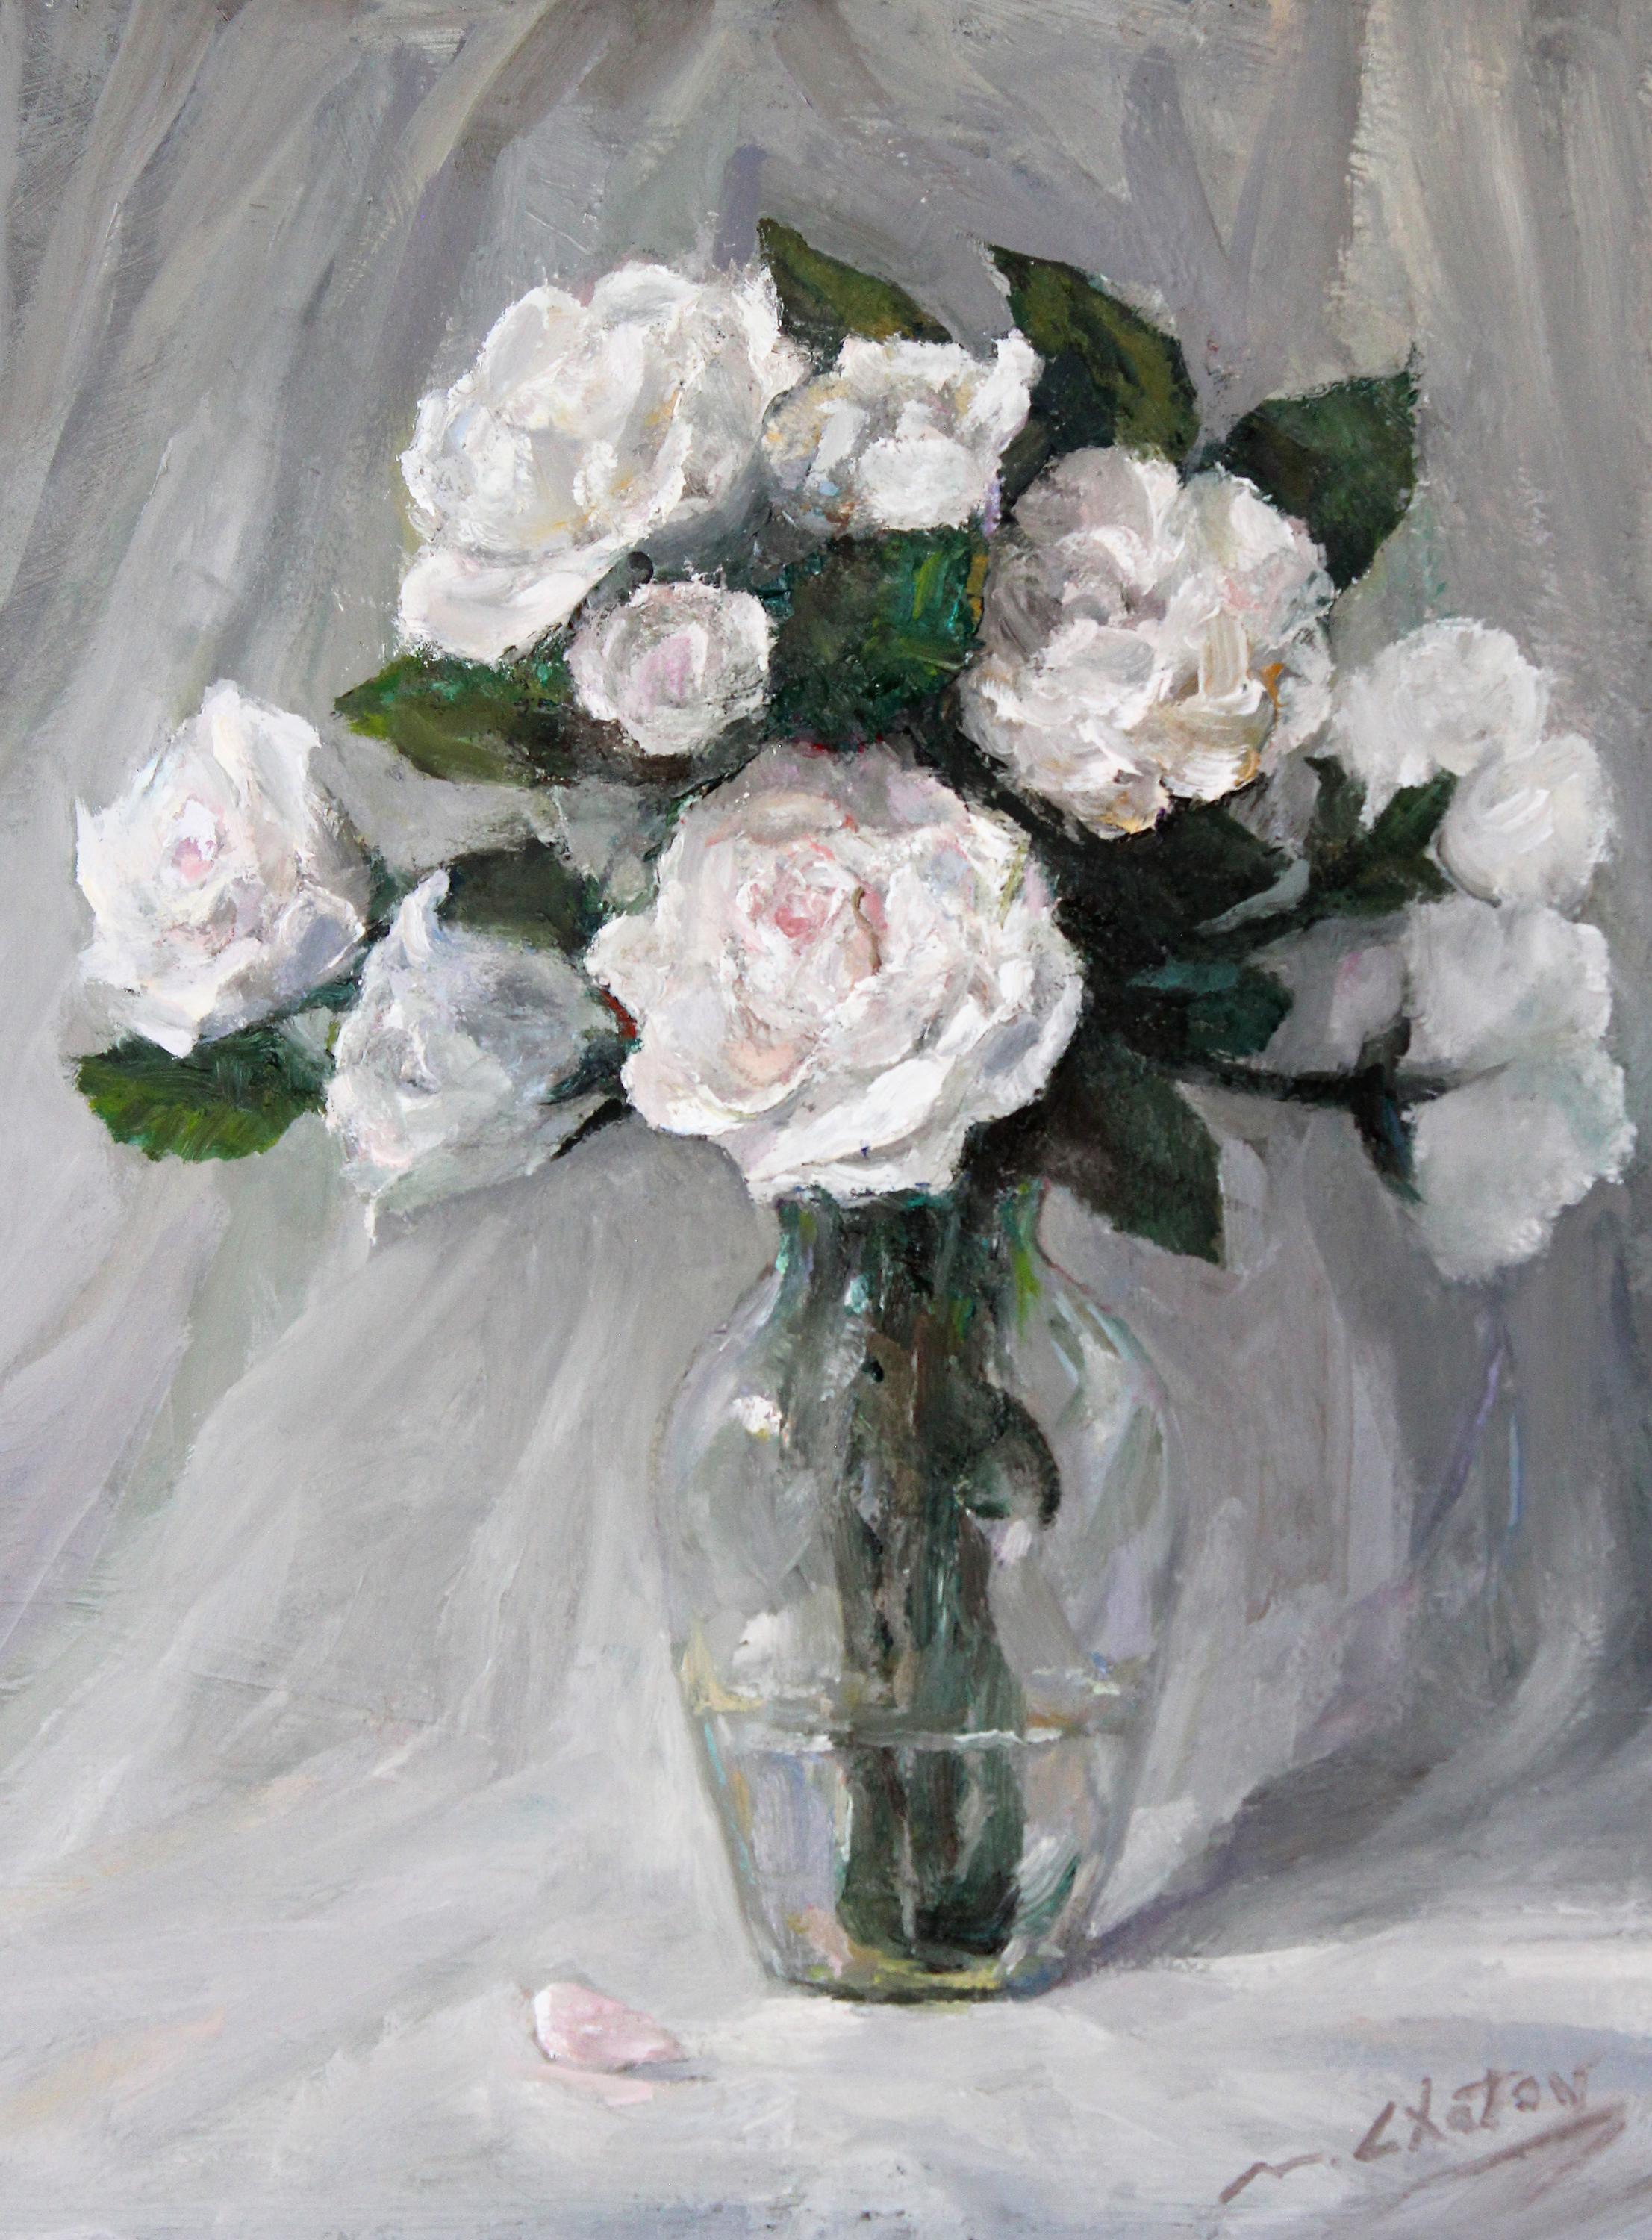 Marc Chatov Still-Life Painting - "White Roses" - Contemporary Realism - Still Life - Manet